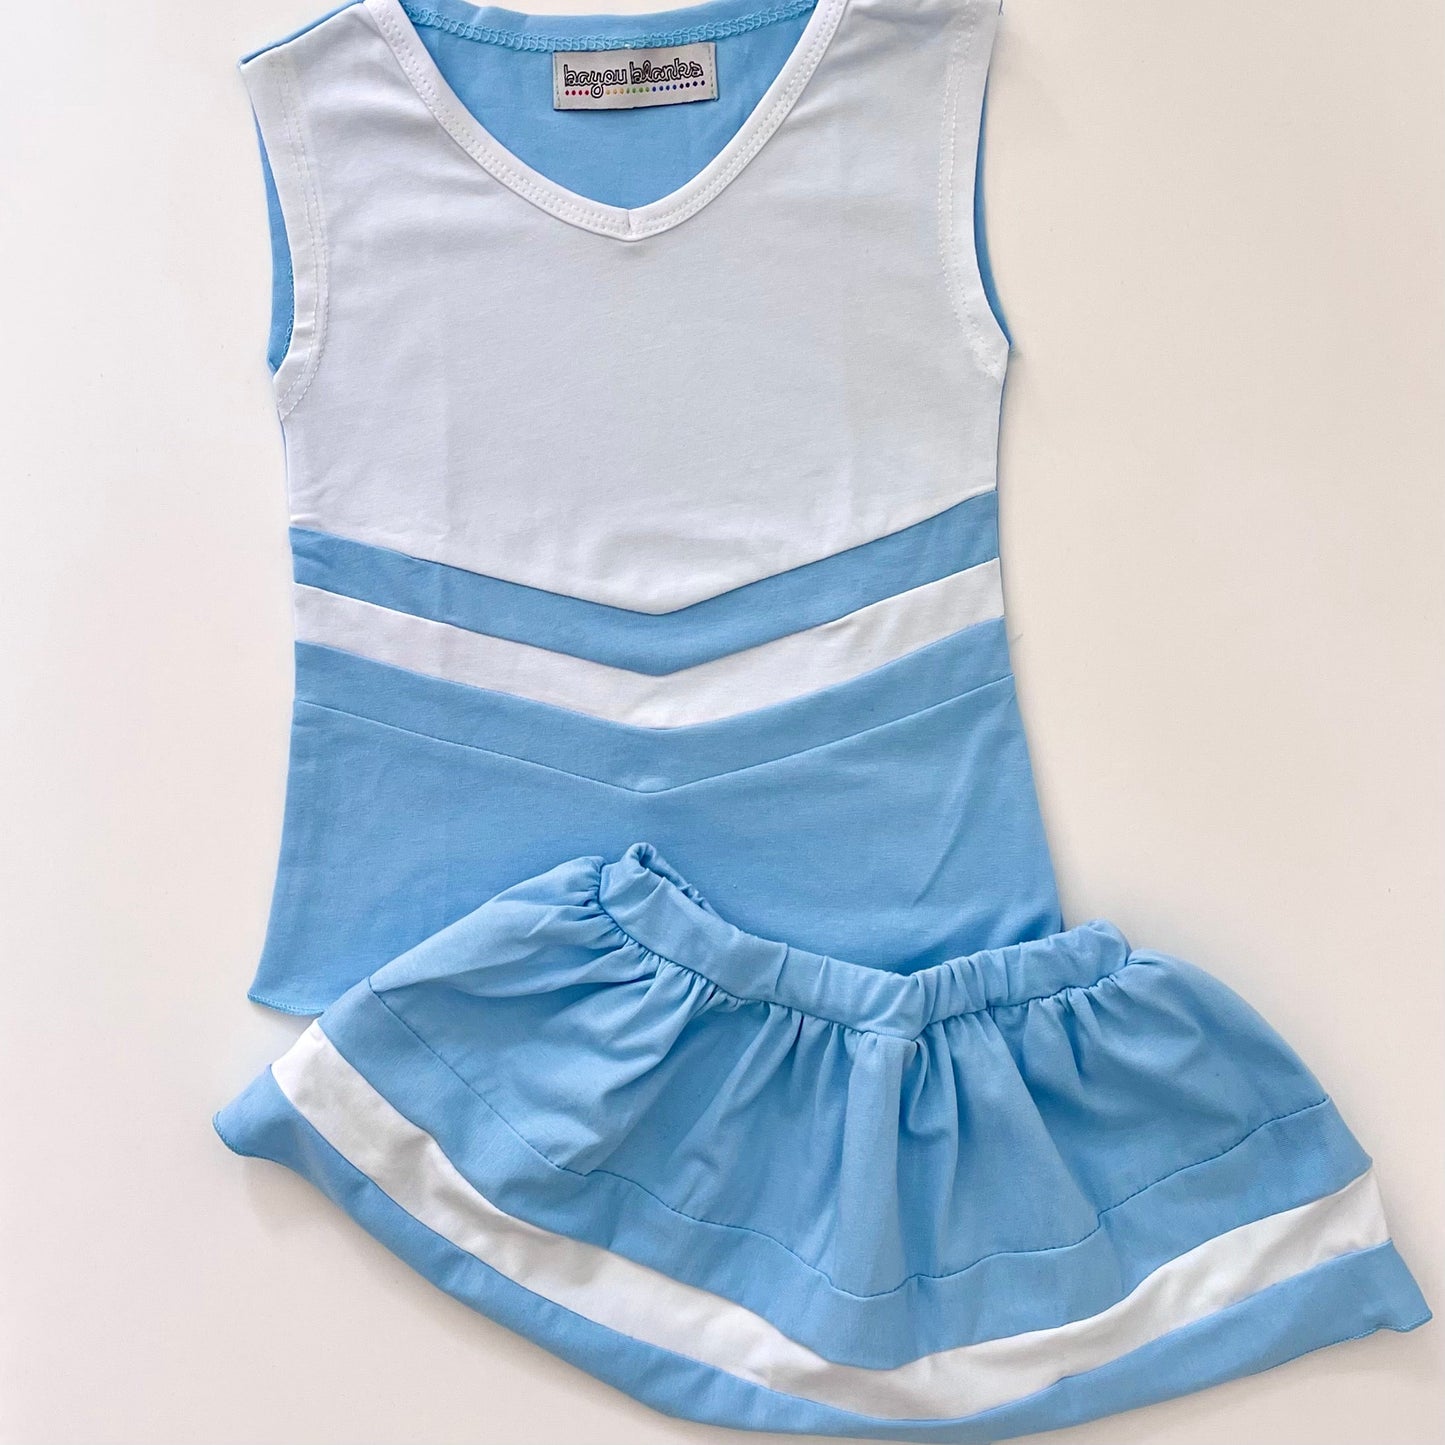 #16—Carolina Blue/White Cheer Outfit